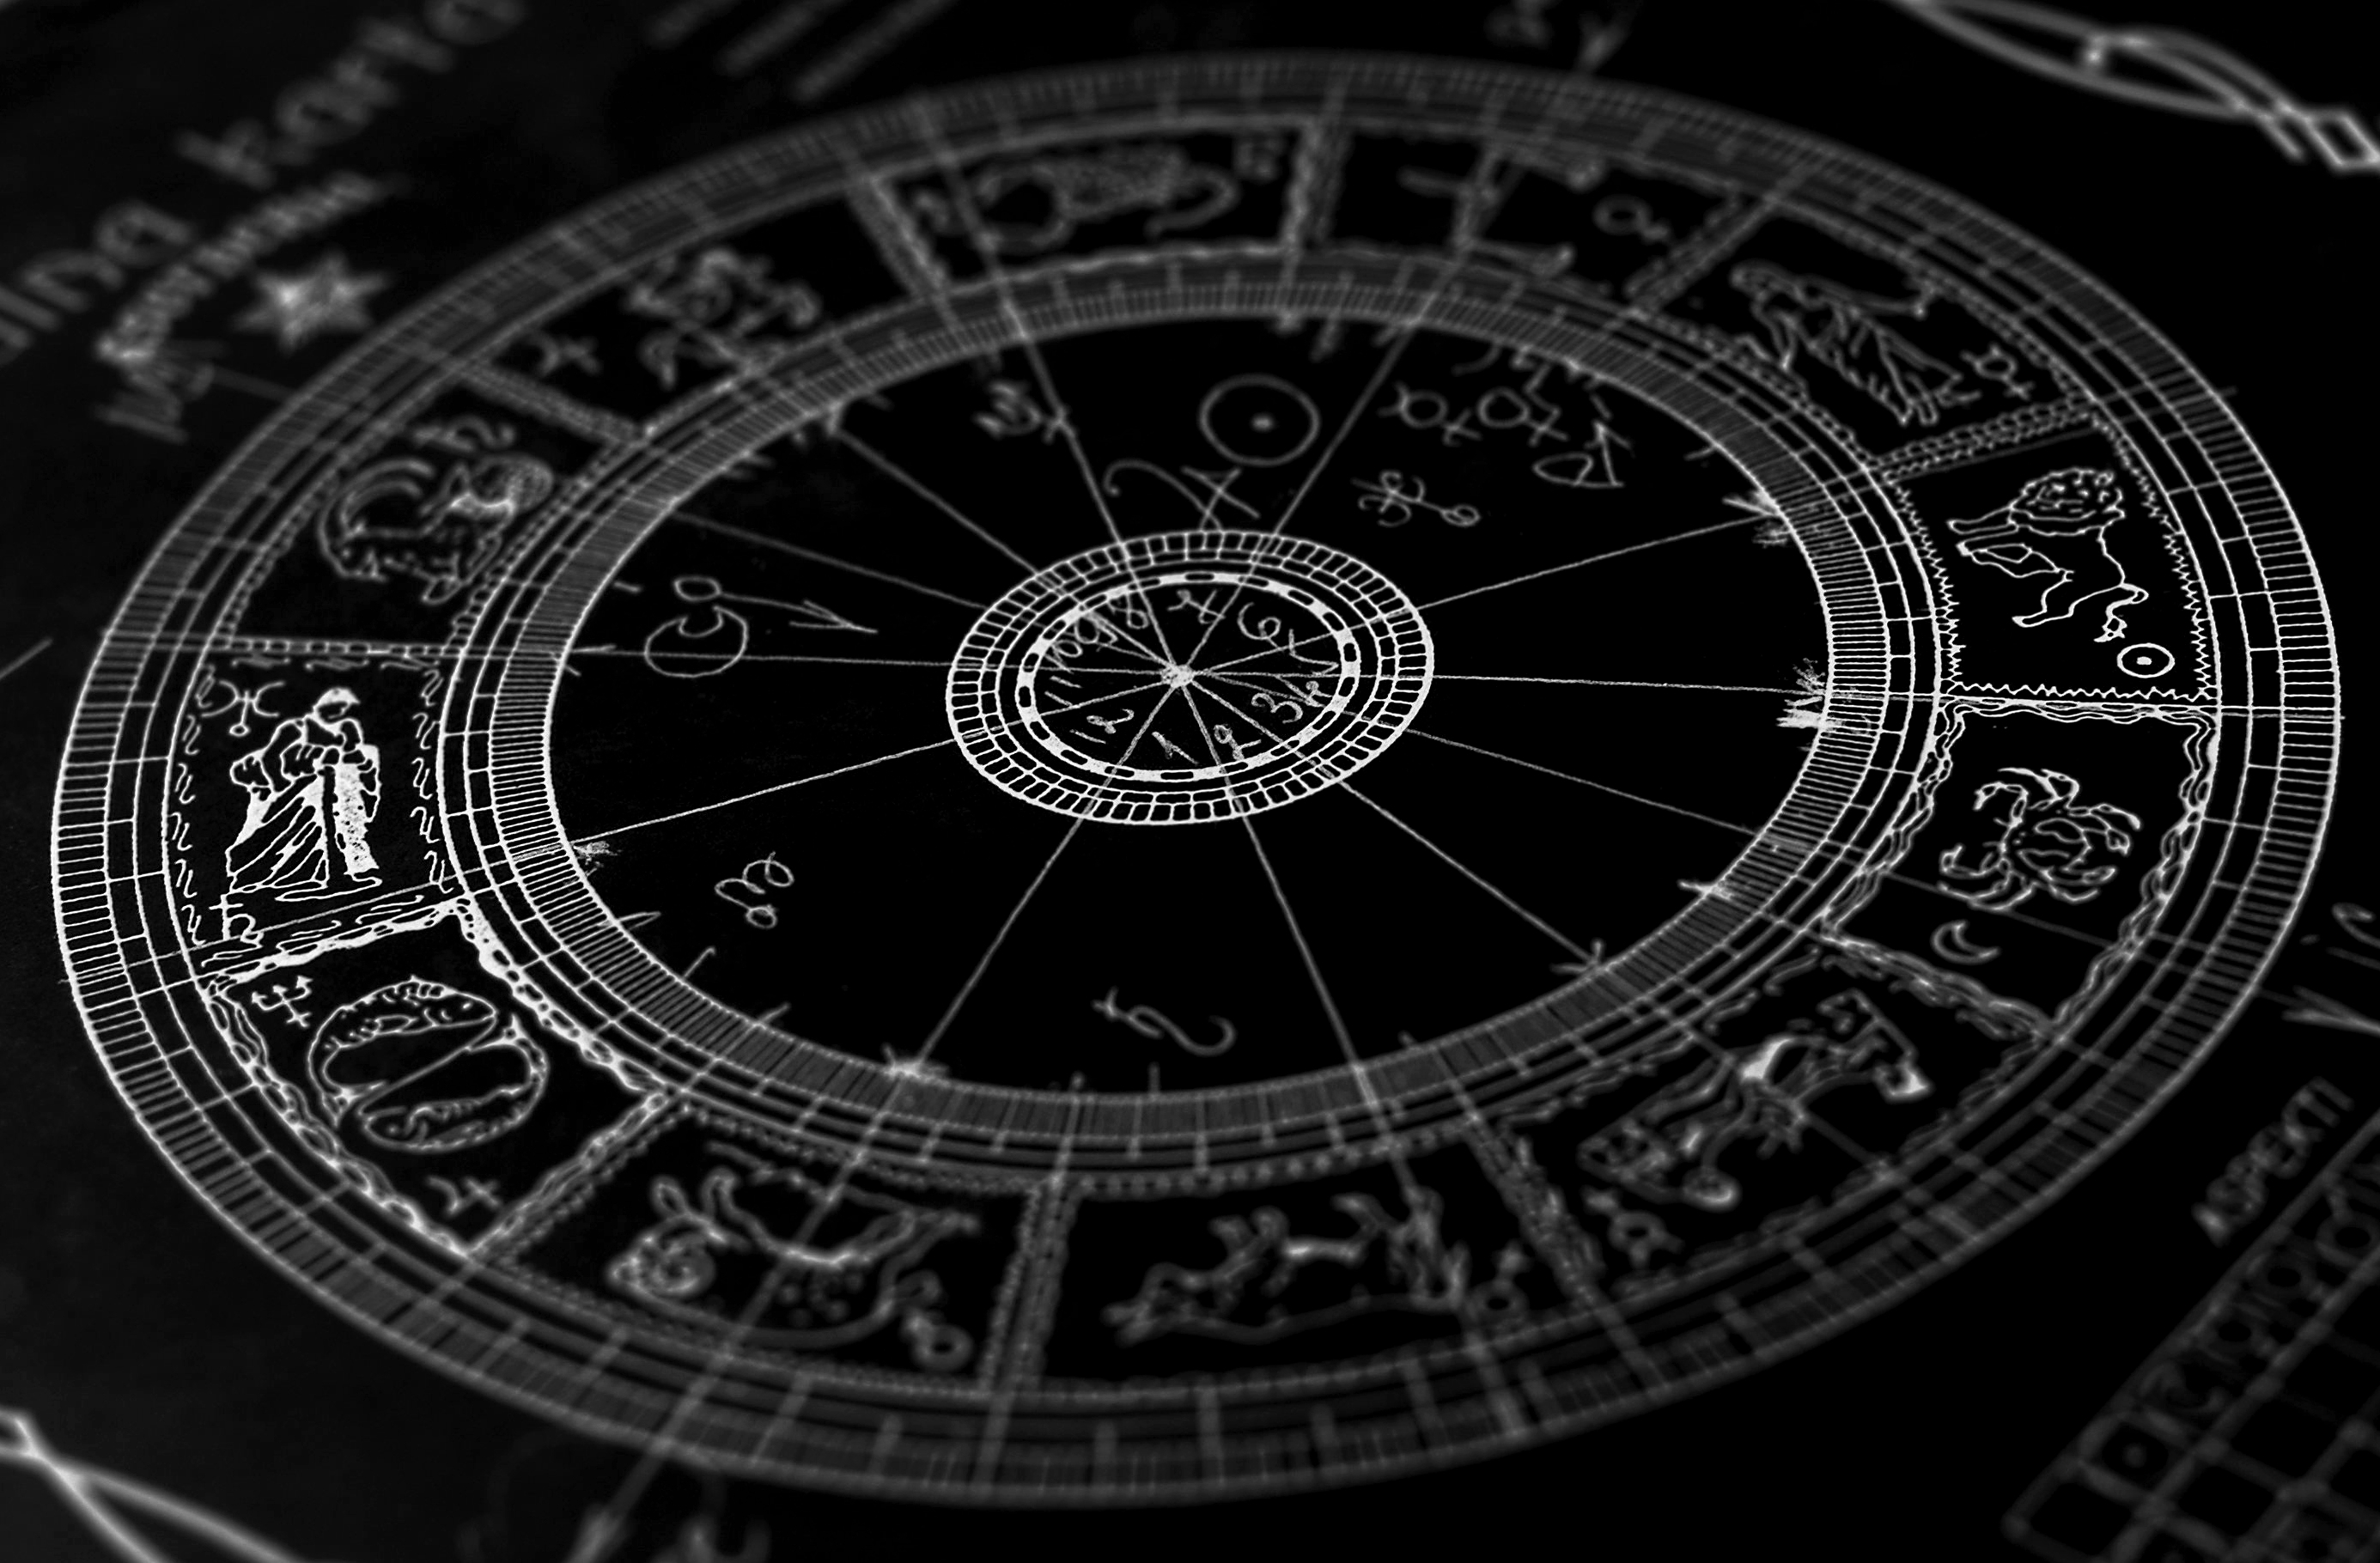 Философия в картинках - Страница 37 Zodiac_signs_Signs_of_the_Zodiac__a_beautiful_picture_on_a_black_background_047504_